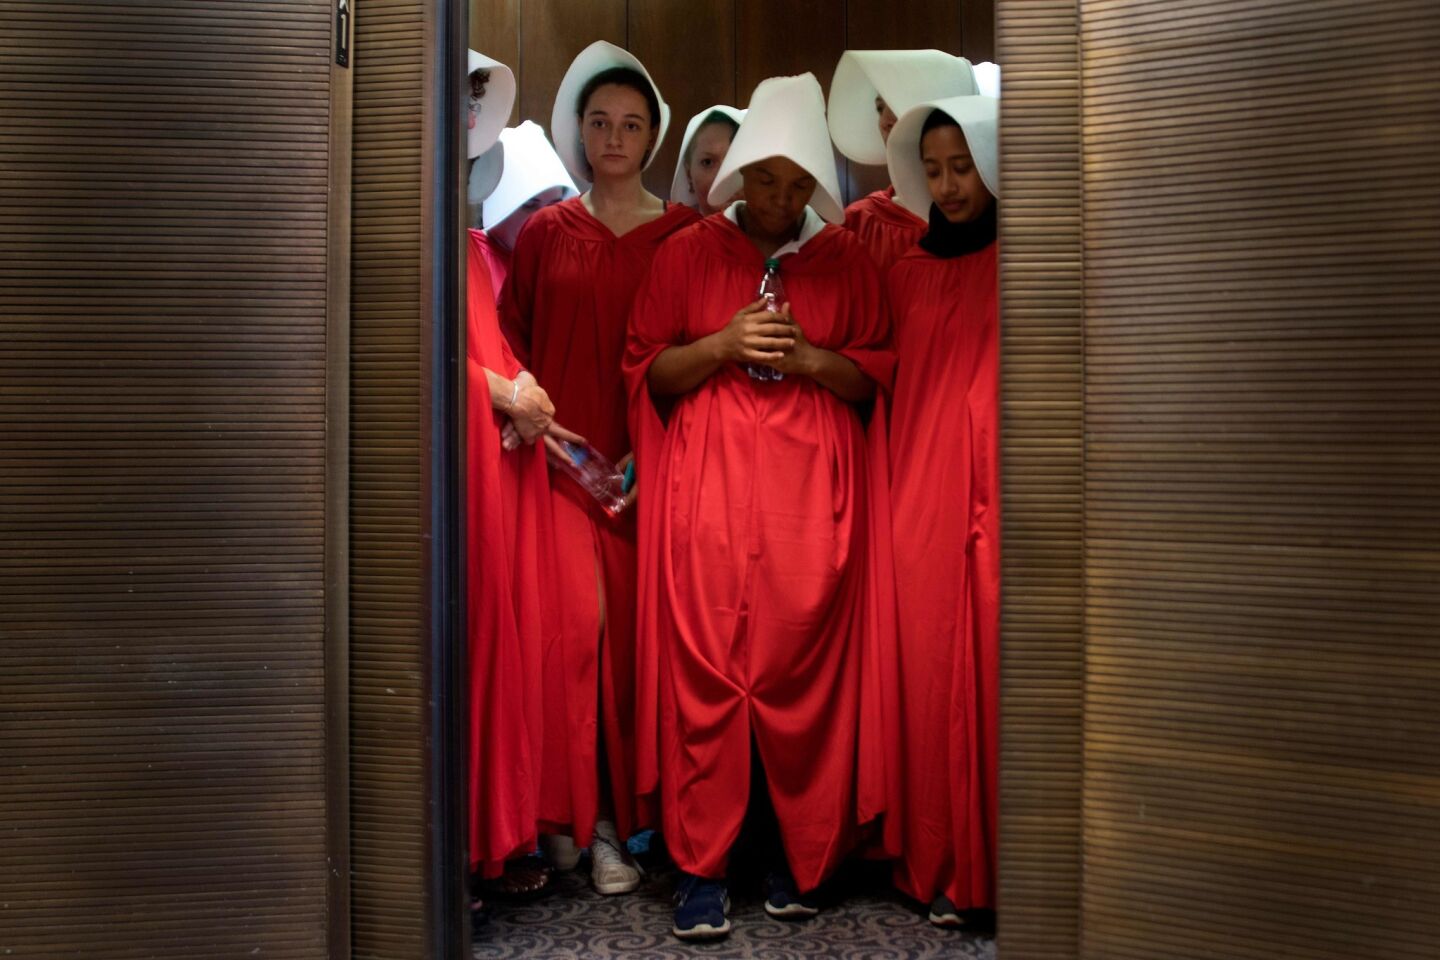 Women dressed as characters from the novel-turned-TV series "The Handmaid's Tale" stand in an elevator at the Hart Senate Office Building as Supreme Court nominee Brett Kavanaugh starts the first day of his confirmation hearings.